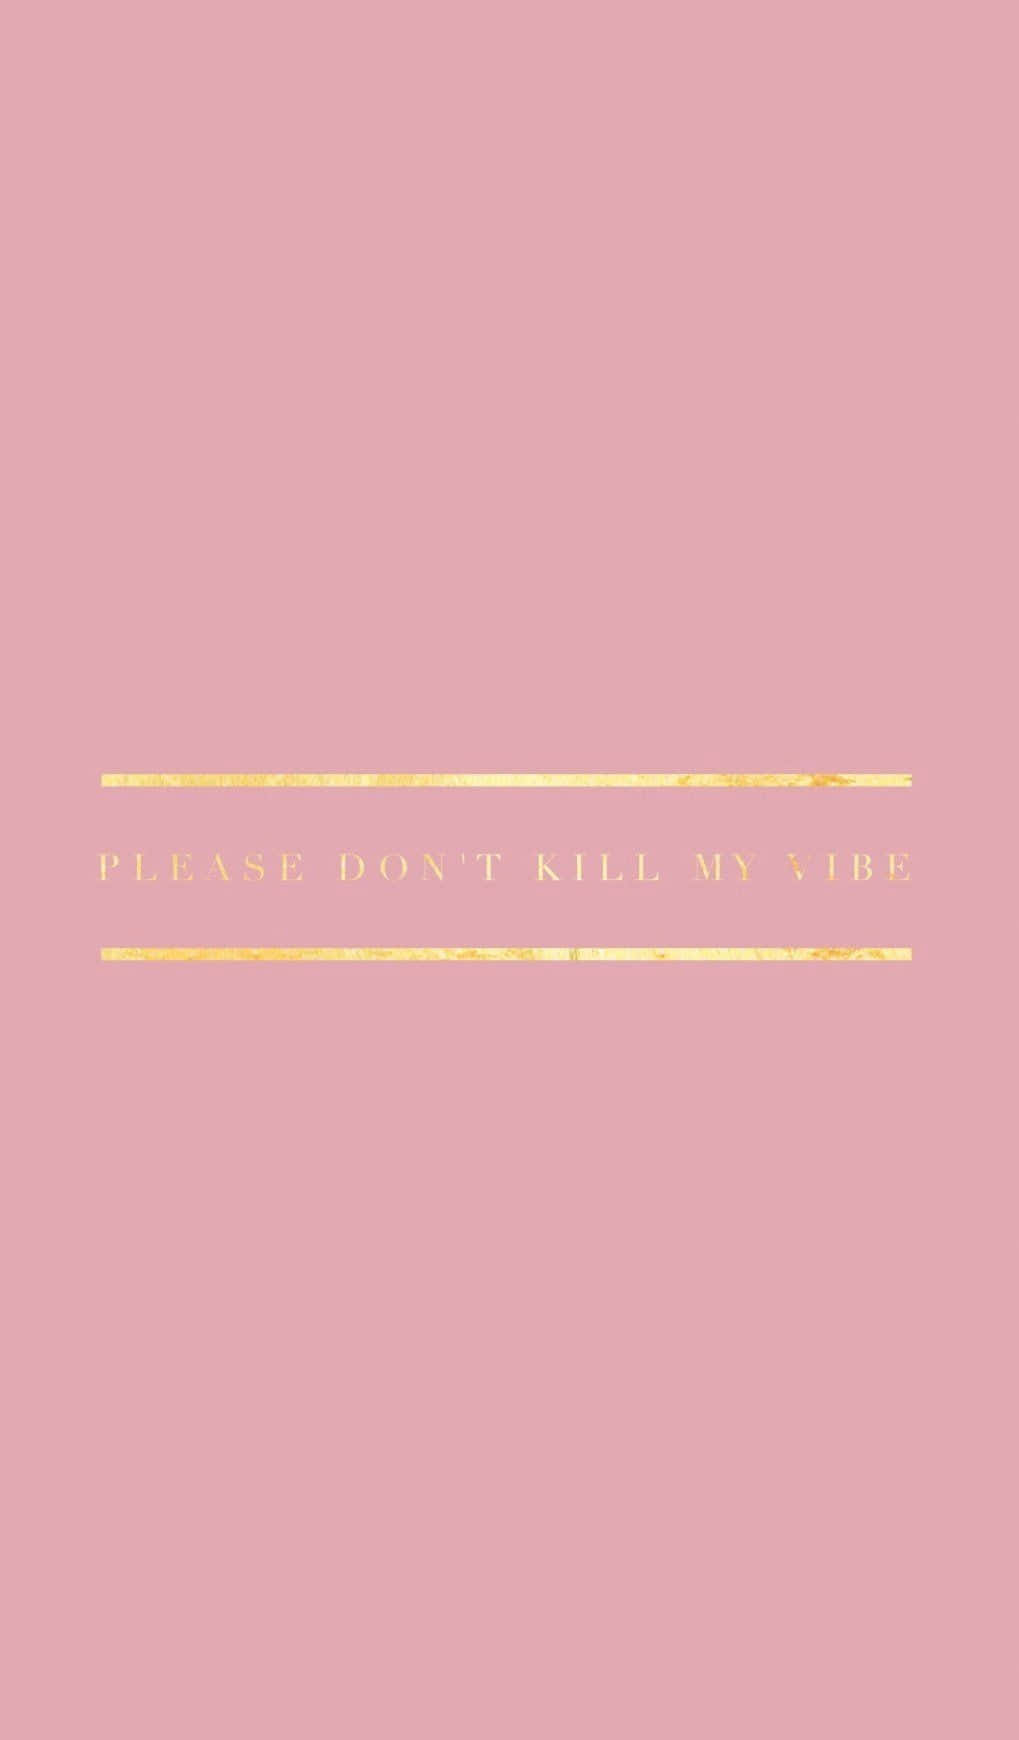 A Pink Background With The Words'because You Don't Kill My Love'